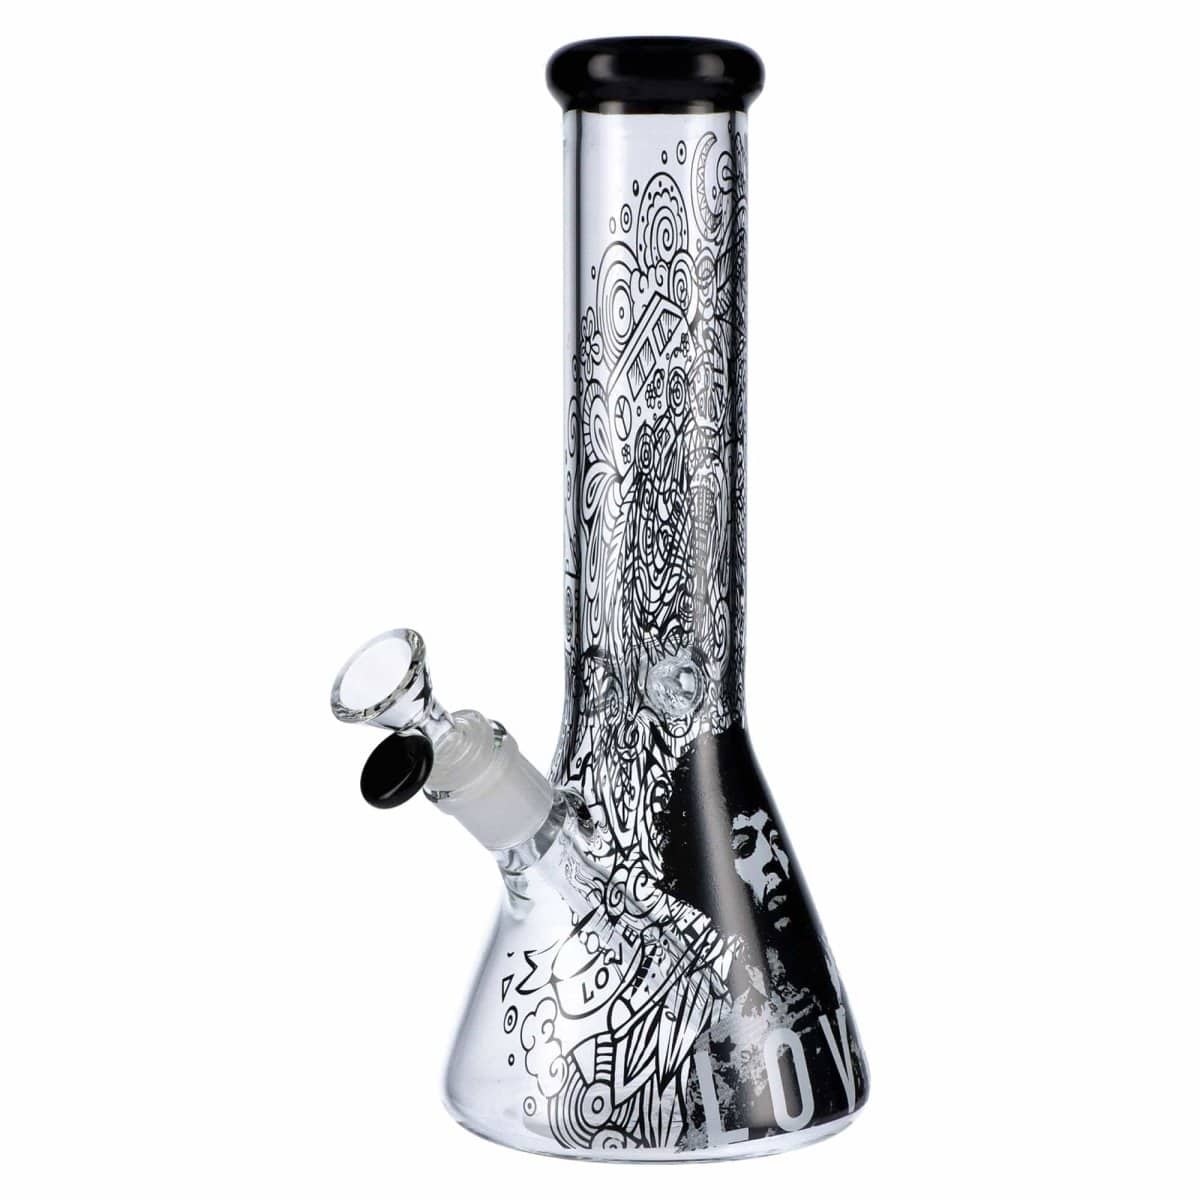 Valiant Distribution HERB - WATER PIPES Rock Legends Jimi Love Water Pipe 12 in.